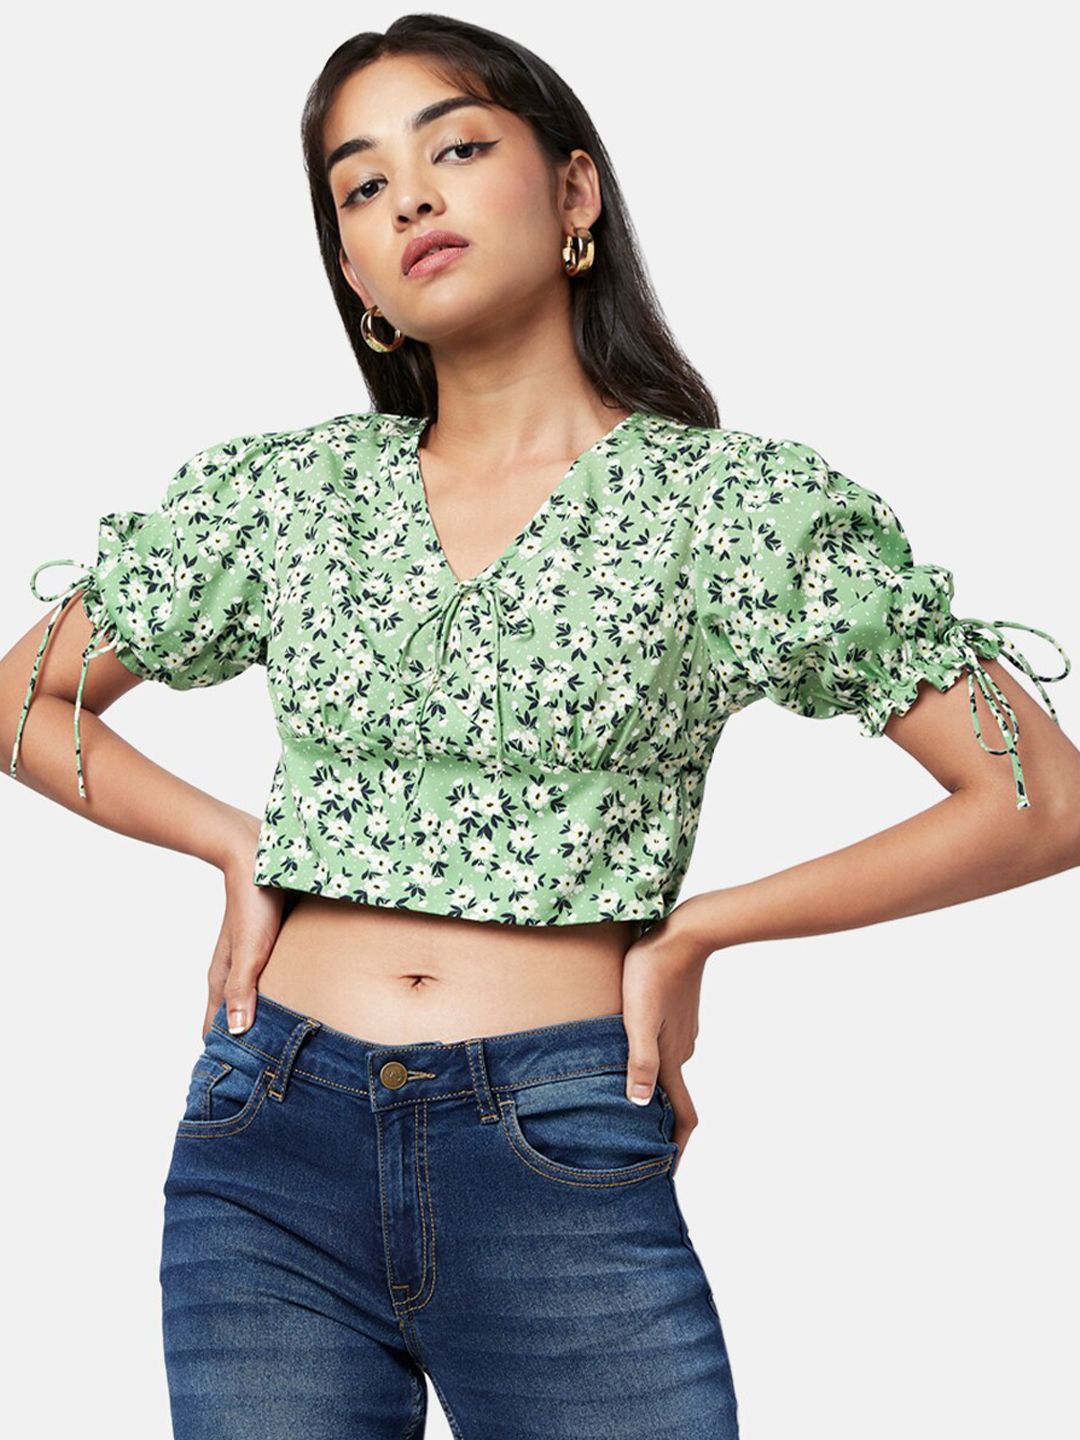 YU by Pantaloons Green & Off White Floral Print Crop Top Price in India